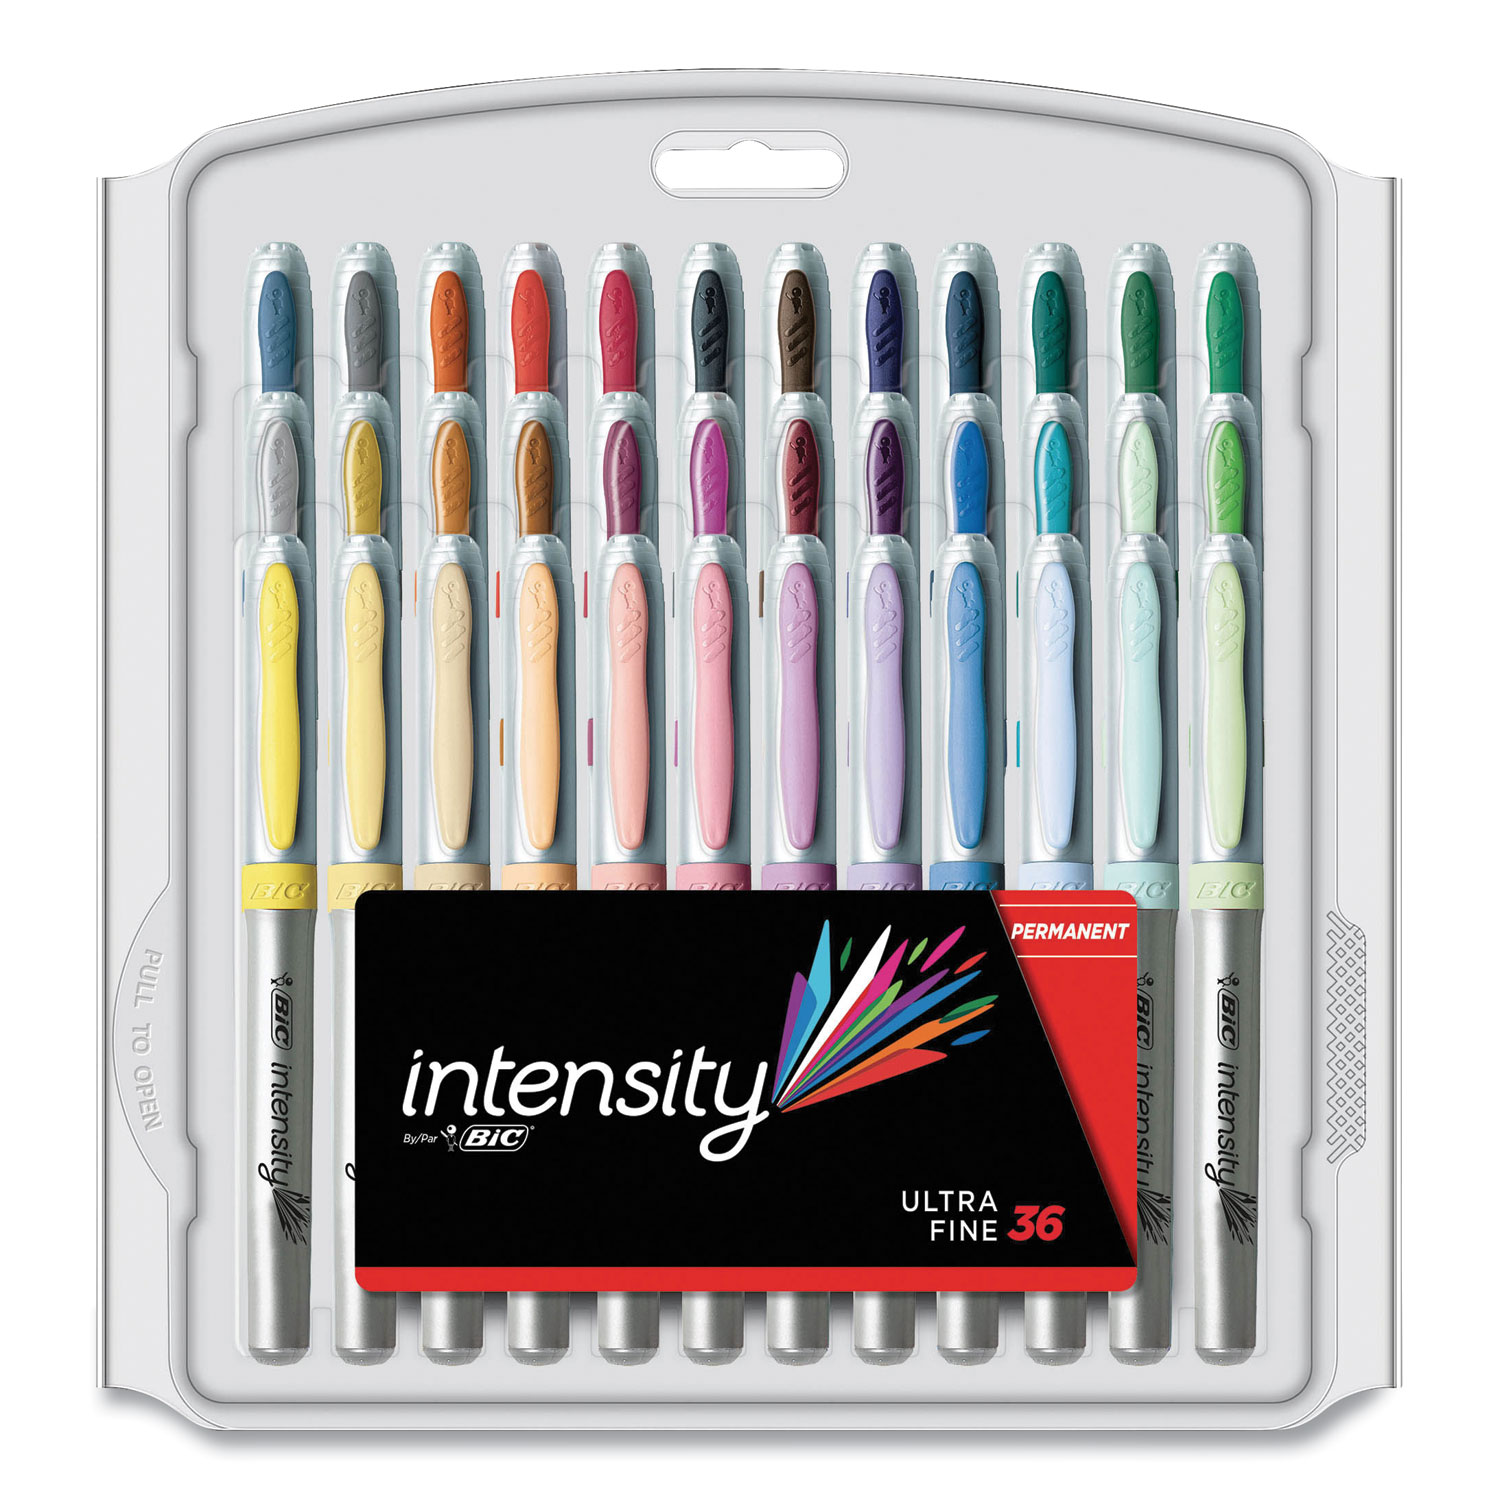  BIC GPMUP361-AST Intensity Permanent Marker, Extra-Fine Needle Tip, Assorted Vivid Fashion Colors, 36/Pack (BIC809229) 